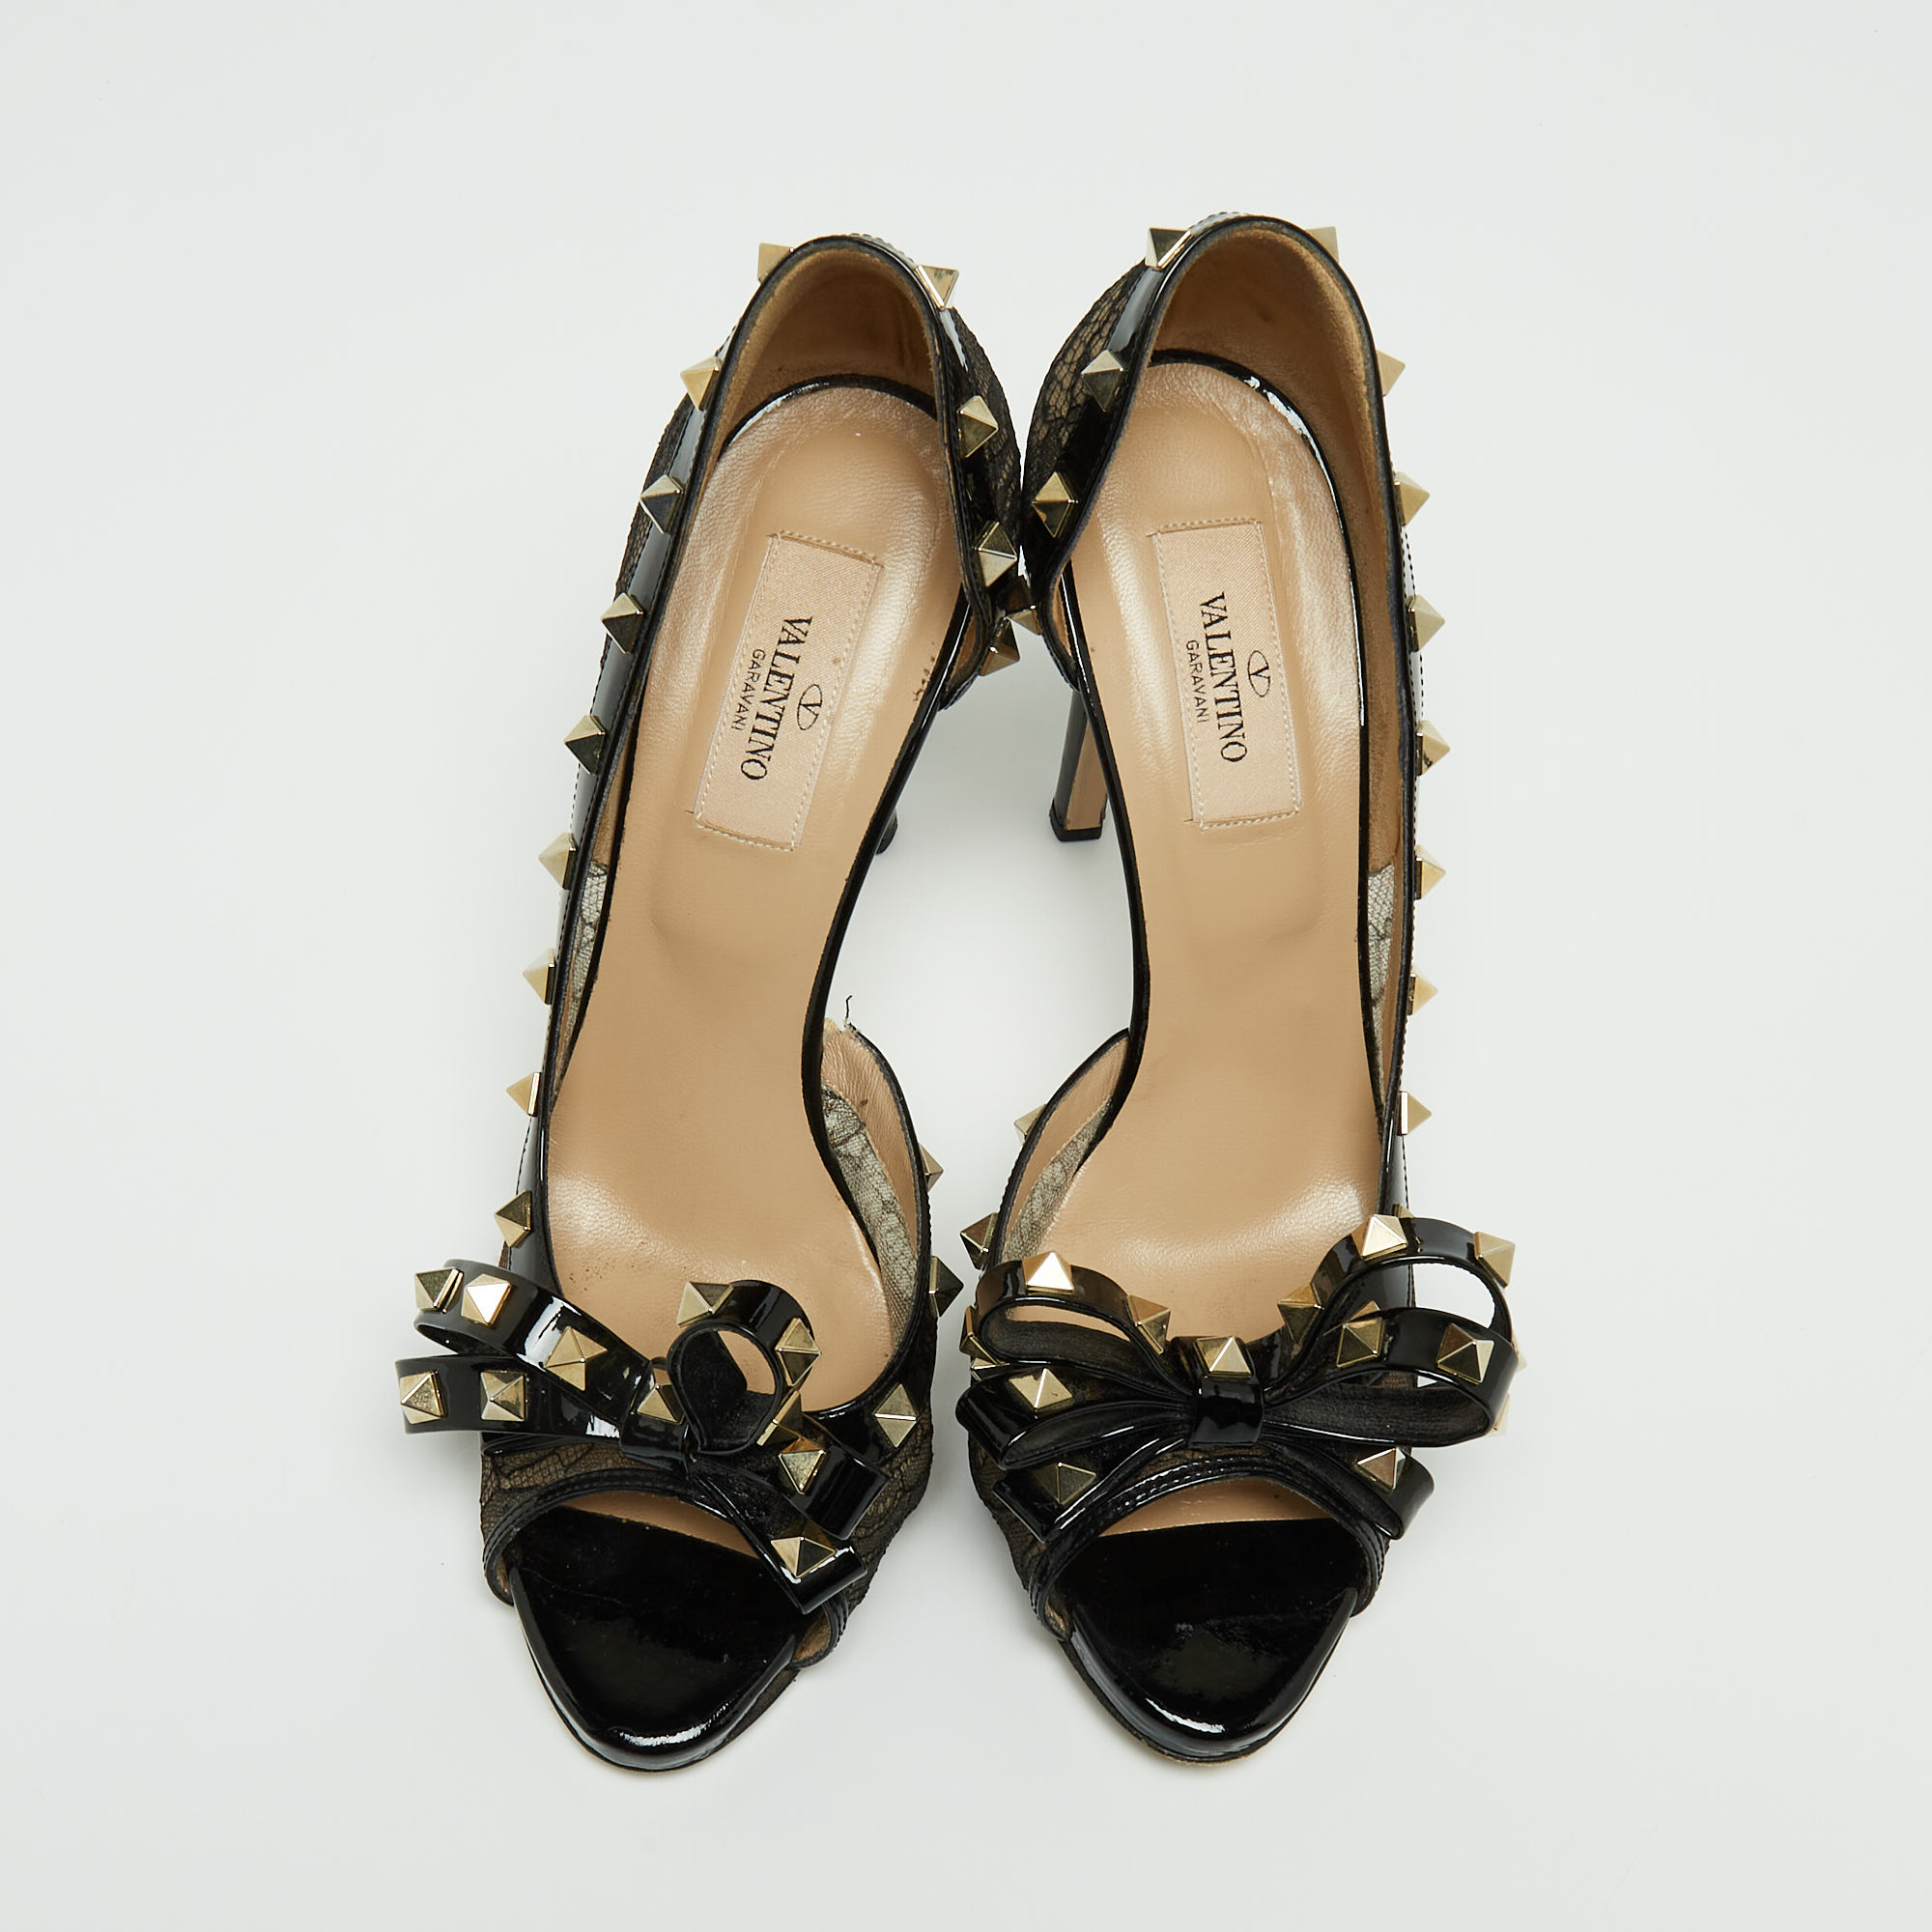 Valentino Black Lace And Patent Rockstud Pumps Size 38.5